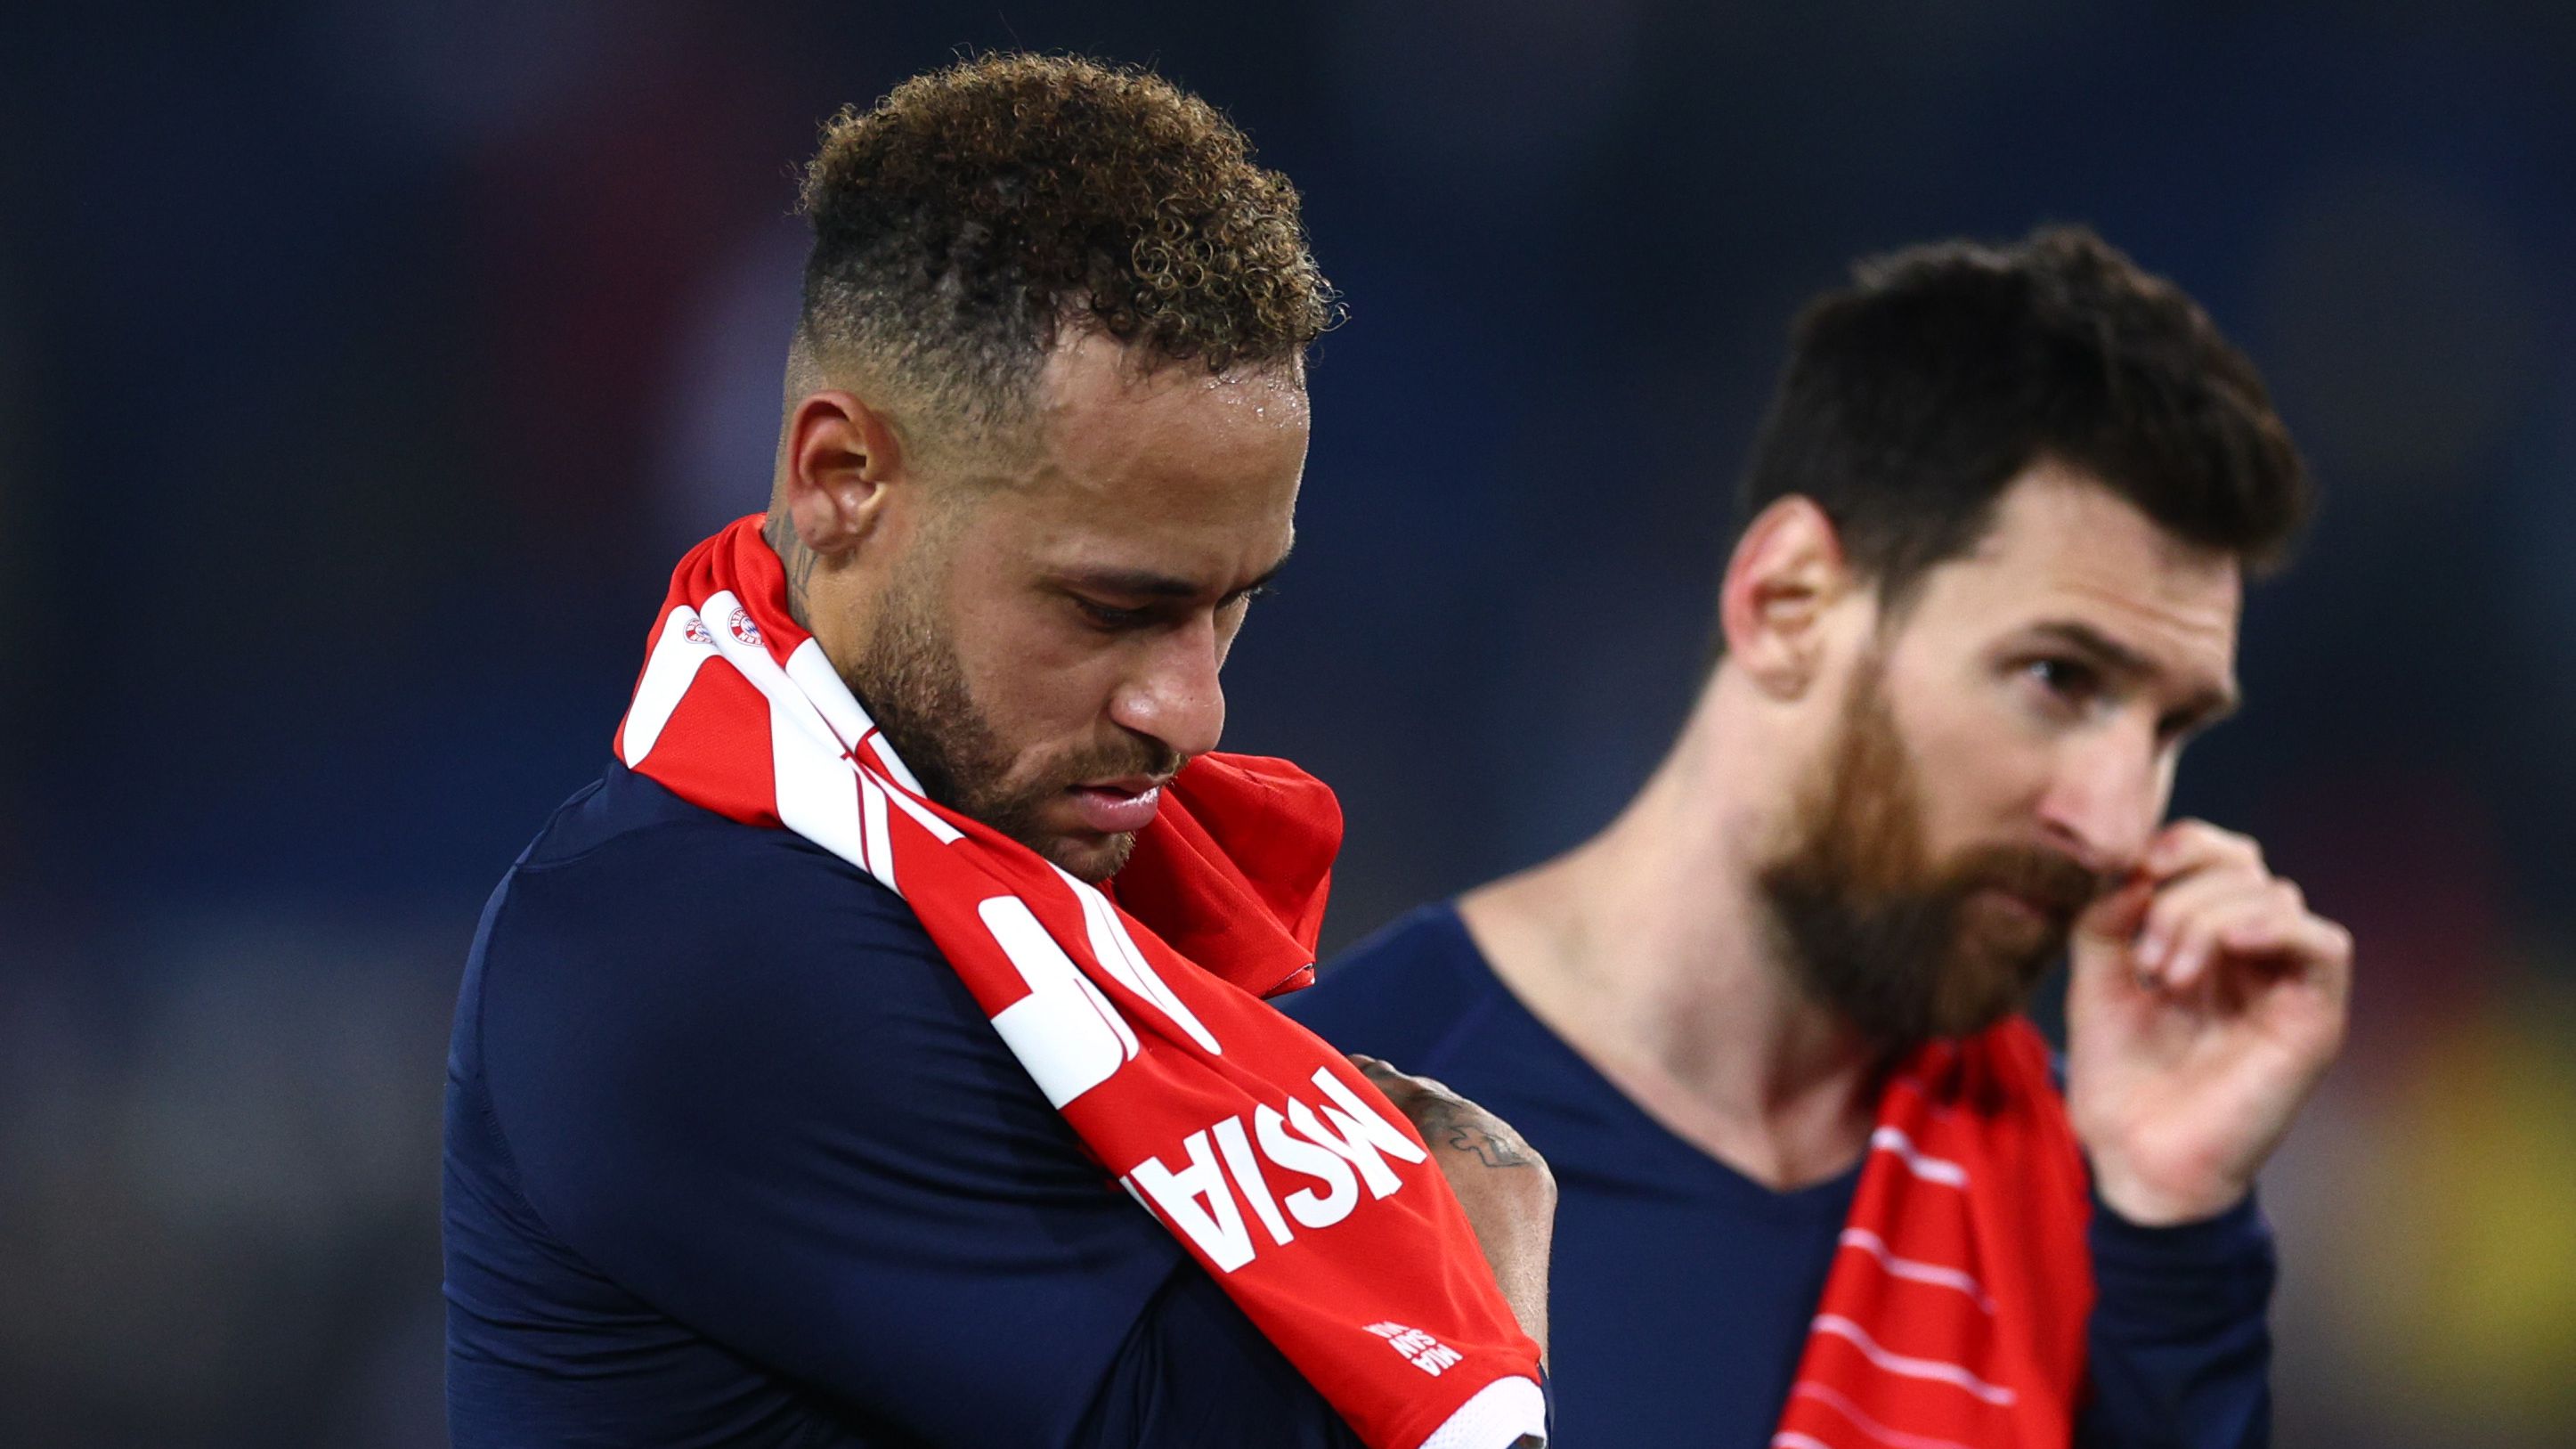 Neymar and Messi must be living their last moments together at PSG (Credit: Getty Images)